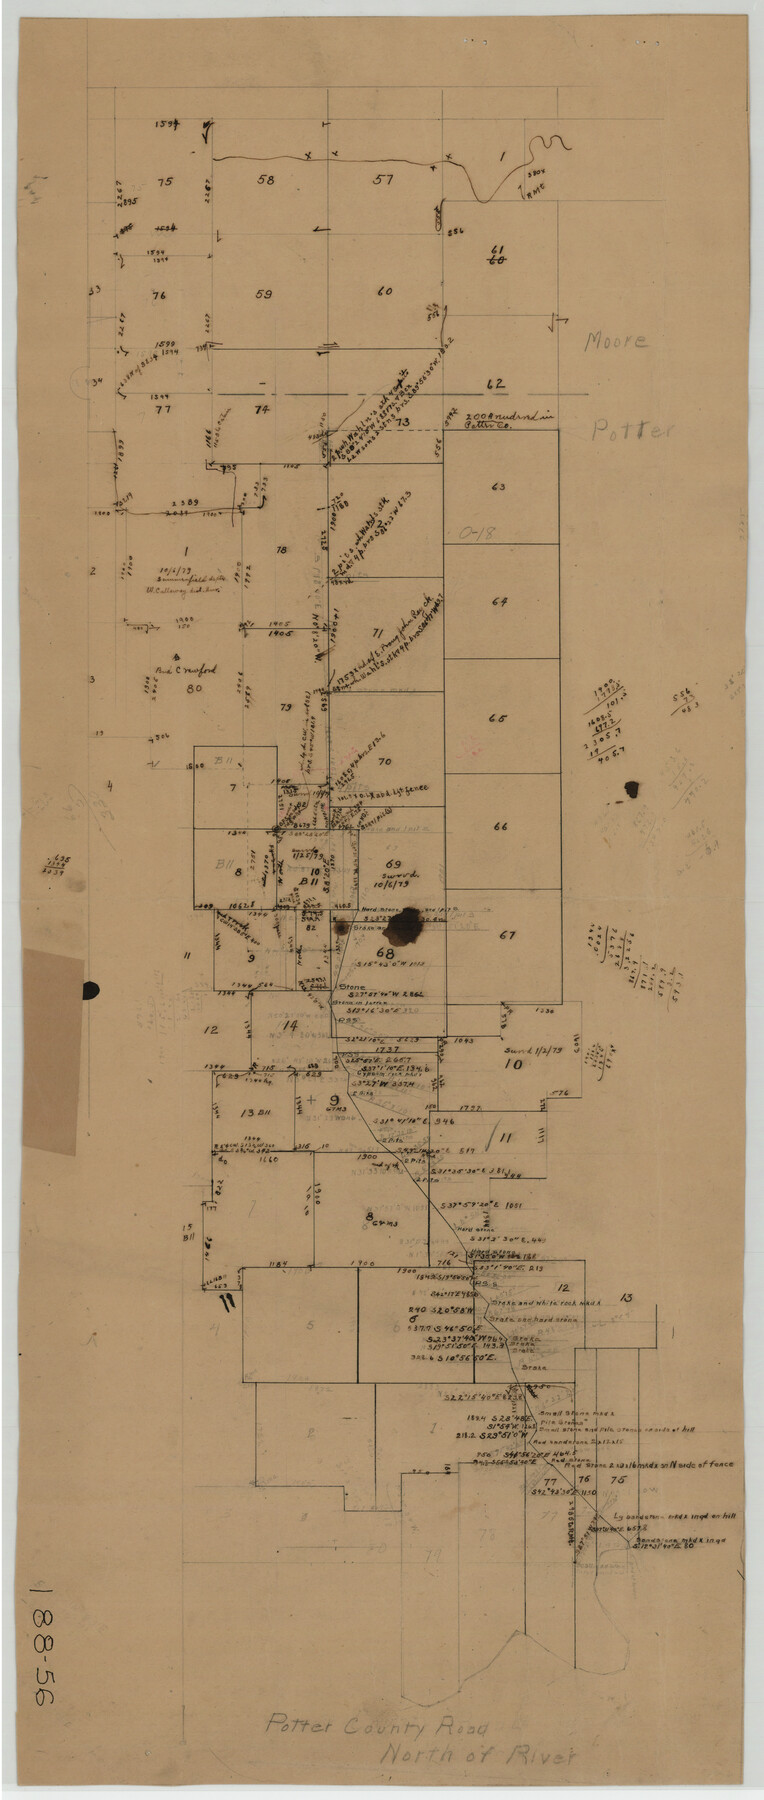 93059, [Sketch of Potter County Road, North of River], Twichell Survey Records